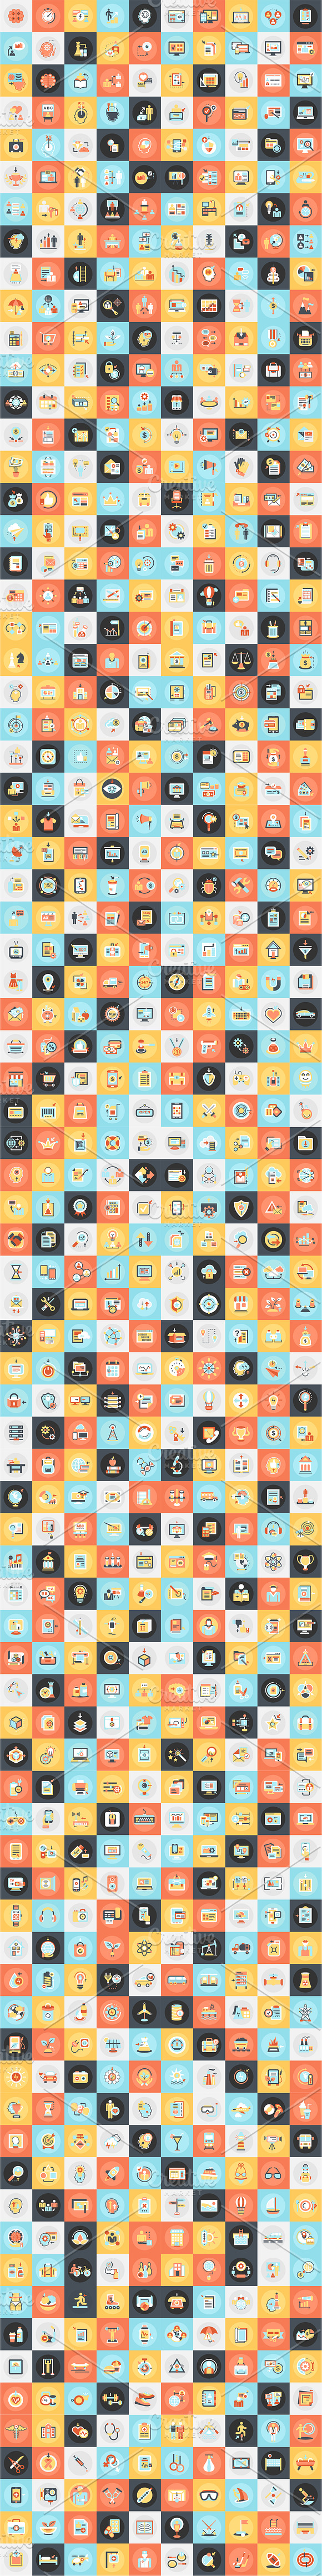 6000+ Flat Icons Bundle in Icons - product preview 8